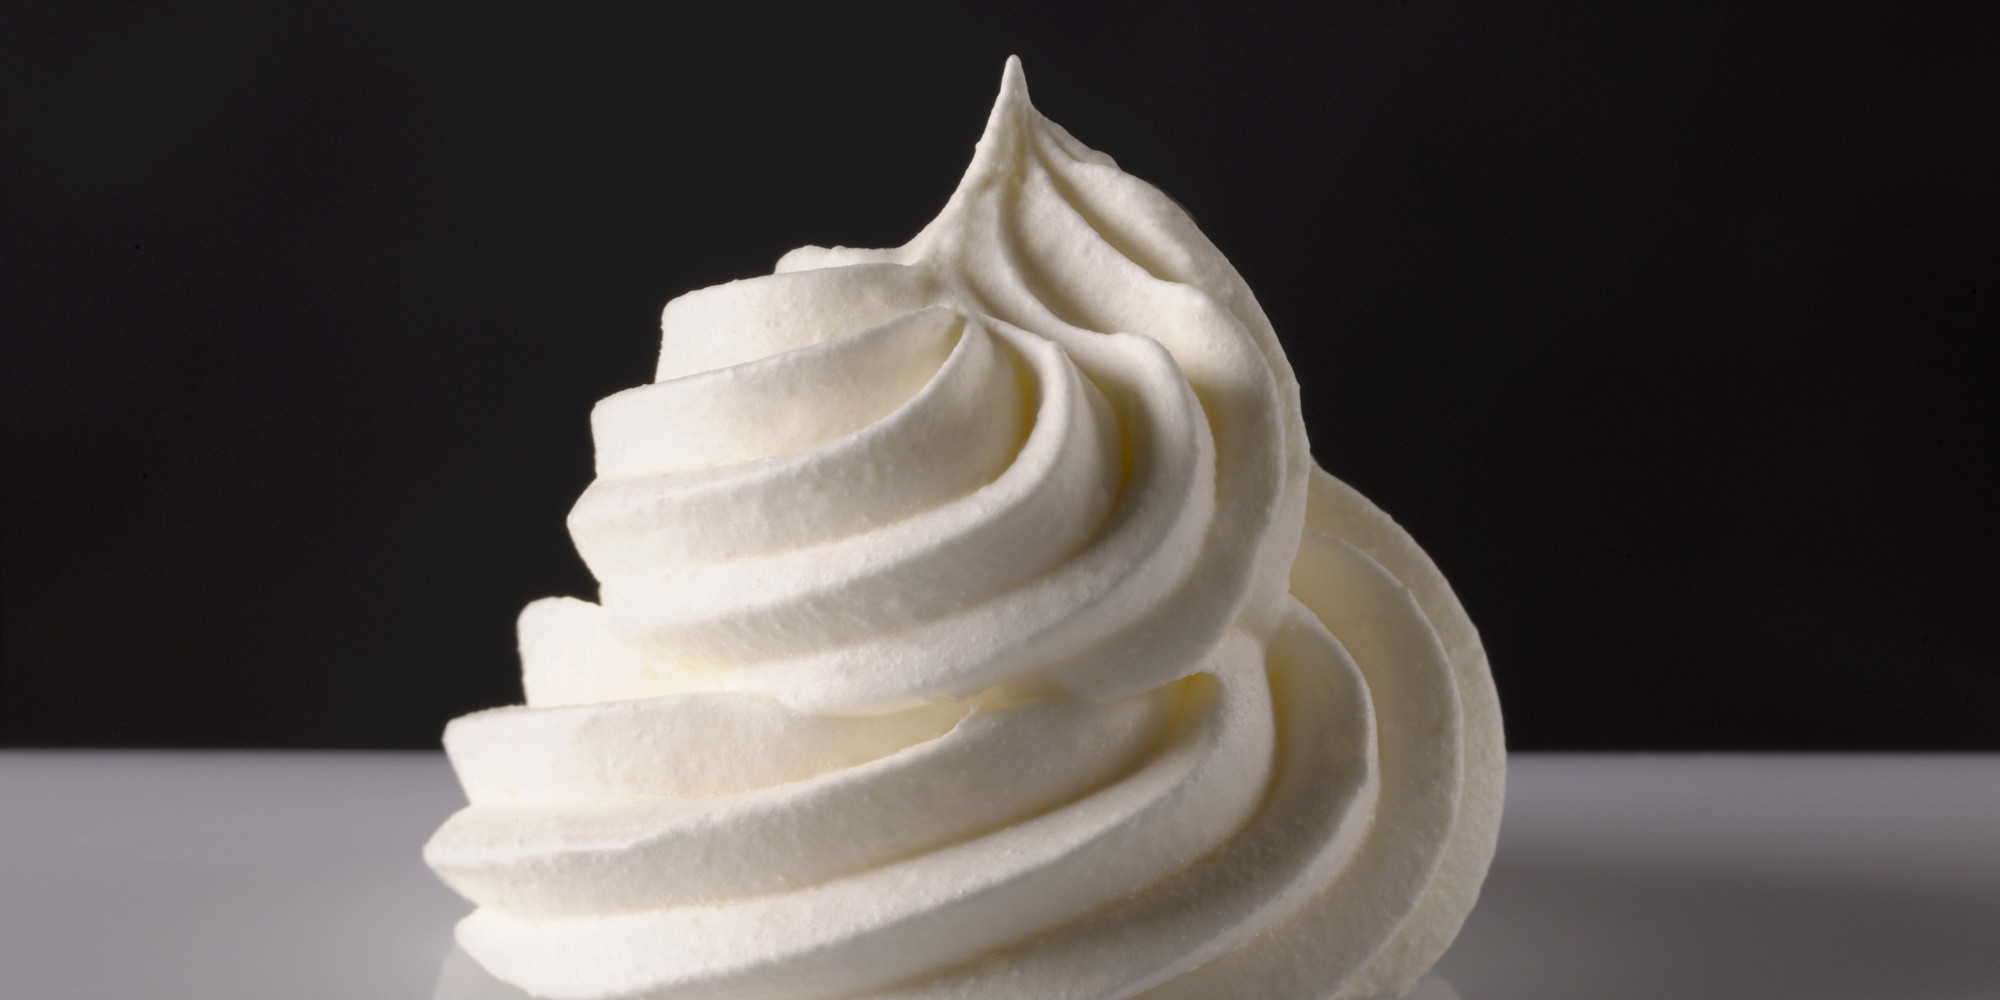 Topping Real Whipped Cream Pressurized 12/15oz - Sold by EA